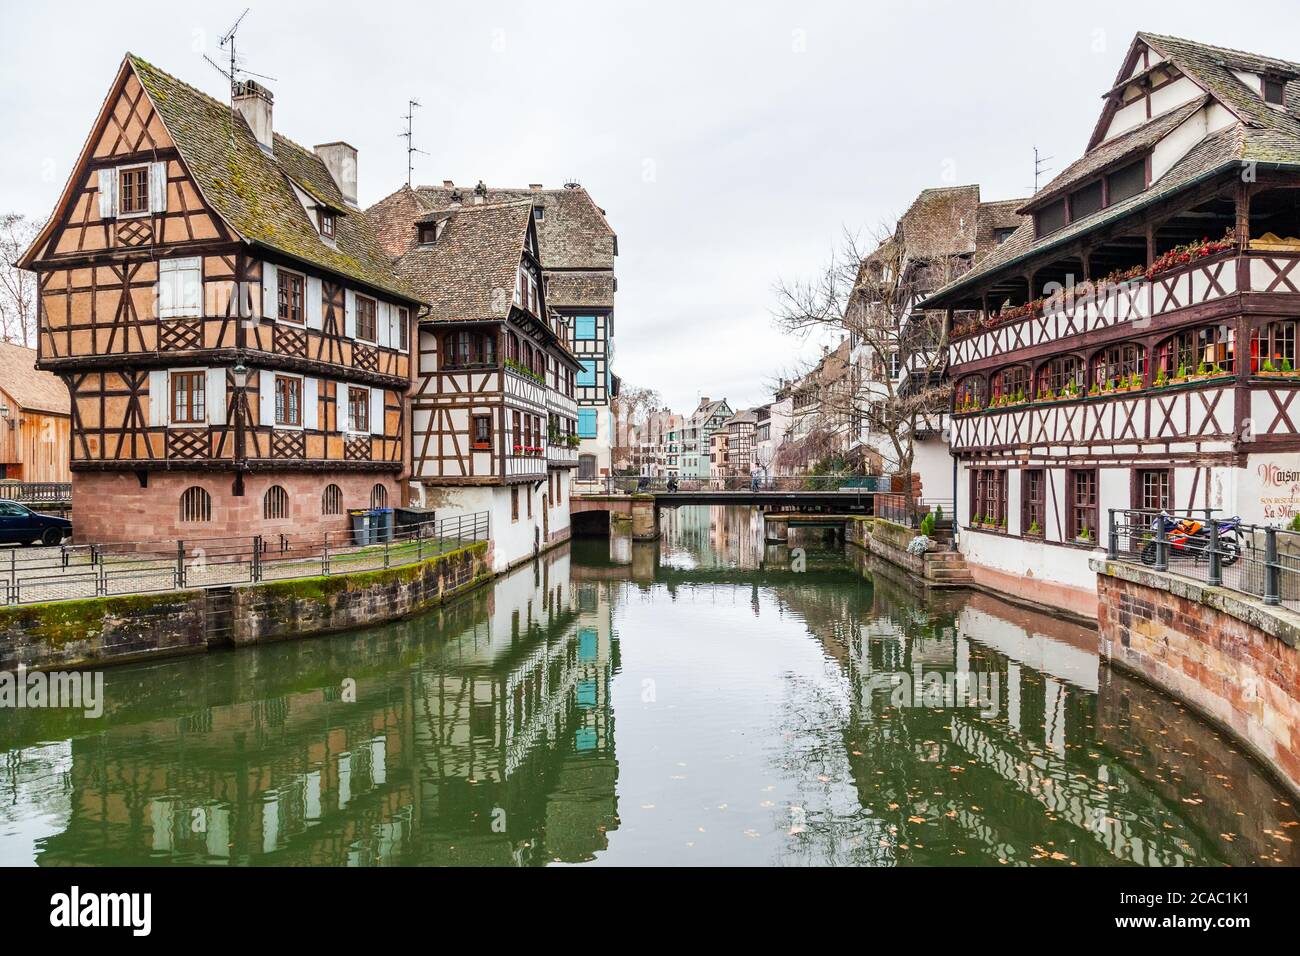 The Petite France - a historic quarter of the city of Strasbourg, Alsace, France Stock Photo